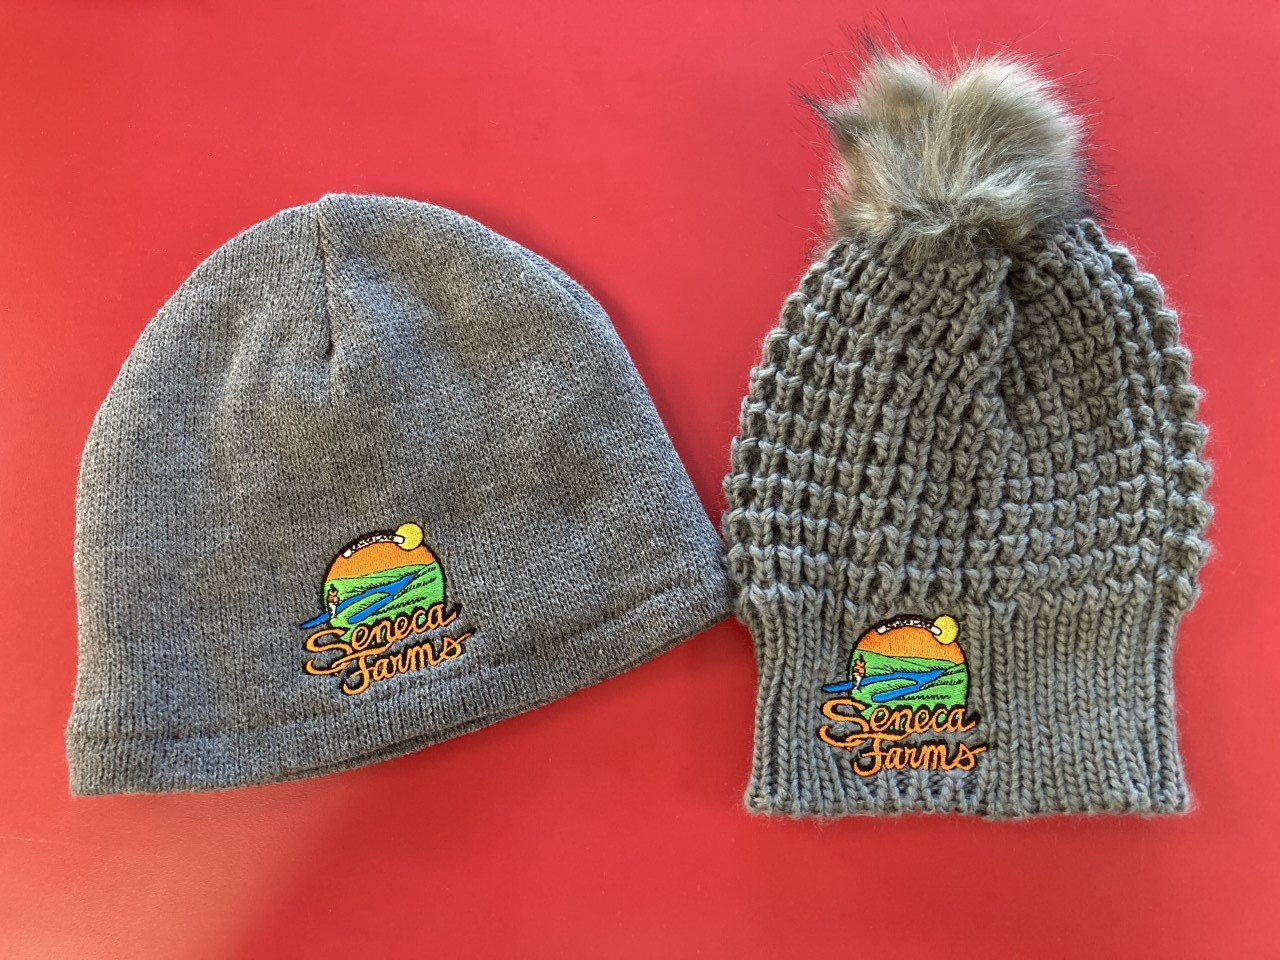 Seneca Farms Cold Weather Beanies, Style: Athletic Beanie